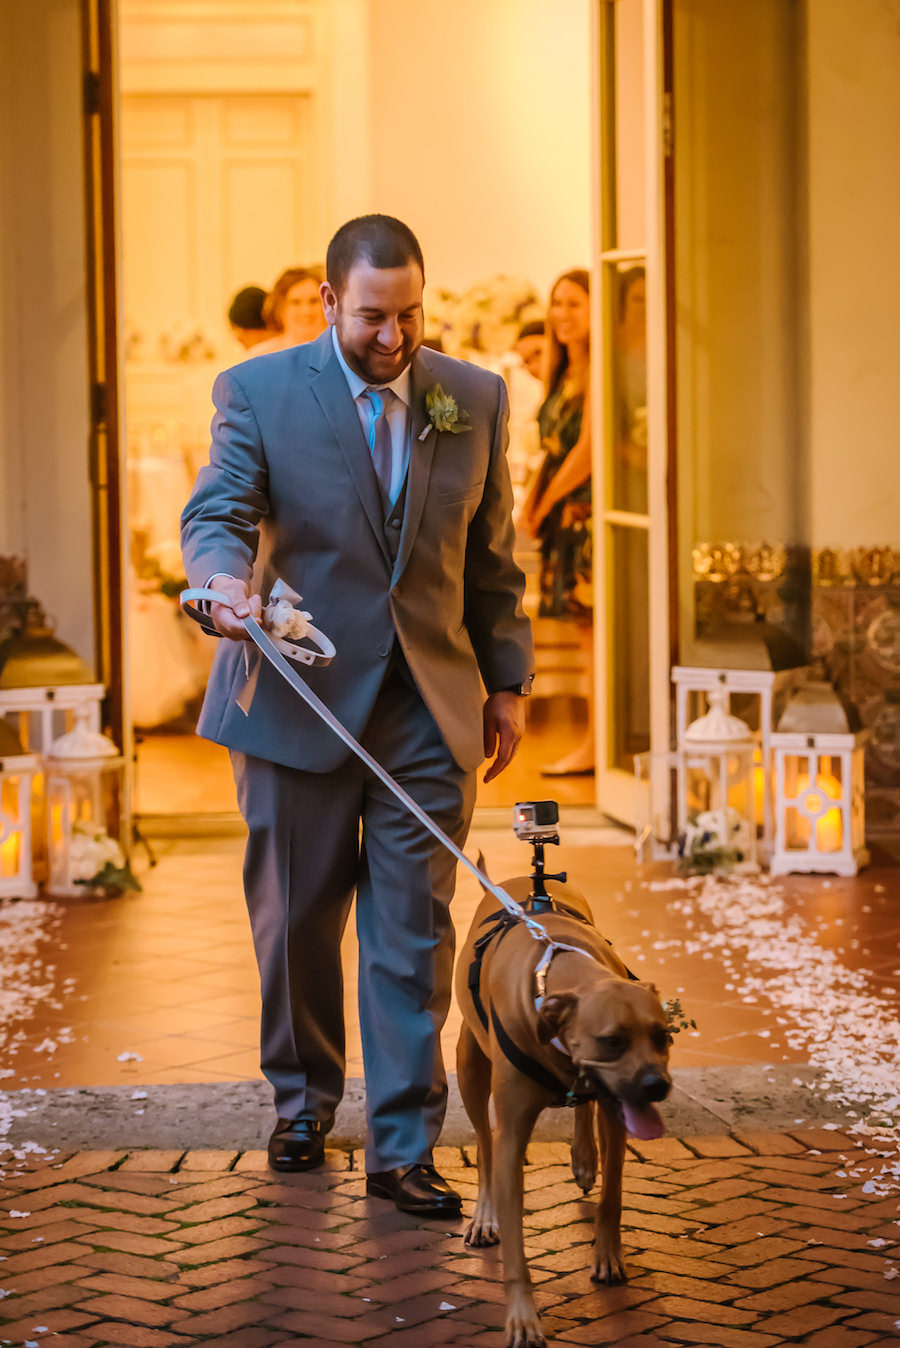 Groomsman and Pet Dog Walking Down The Aisle on Wedding Day | St. Pete Wedding Venue Museum of Fine Art | Specialty Wedding Pet Sitter FairyTail Pet Care